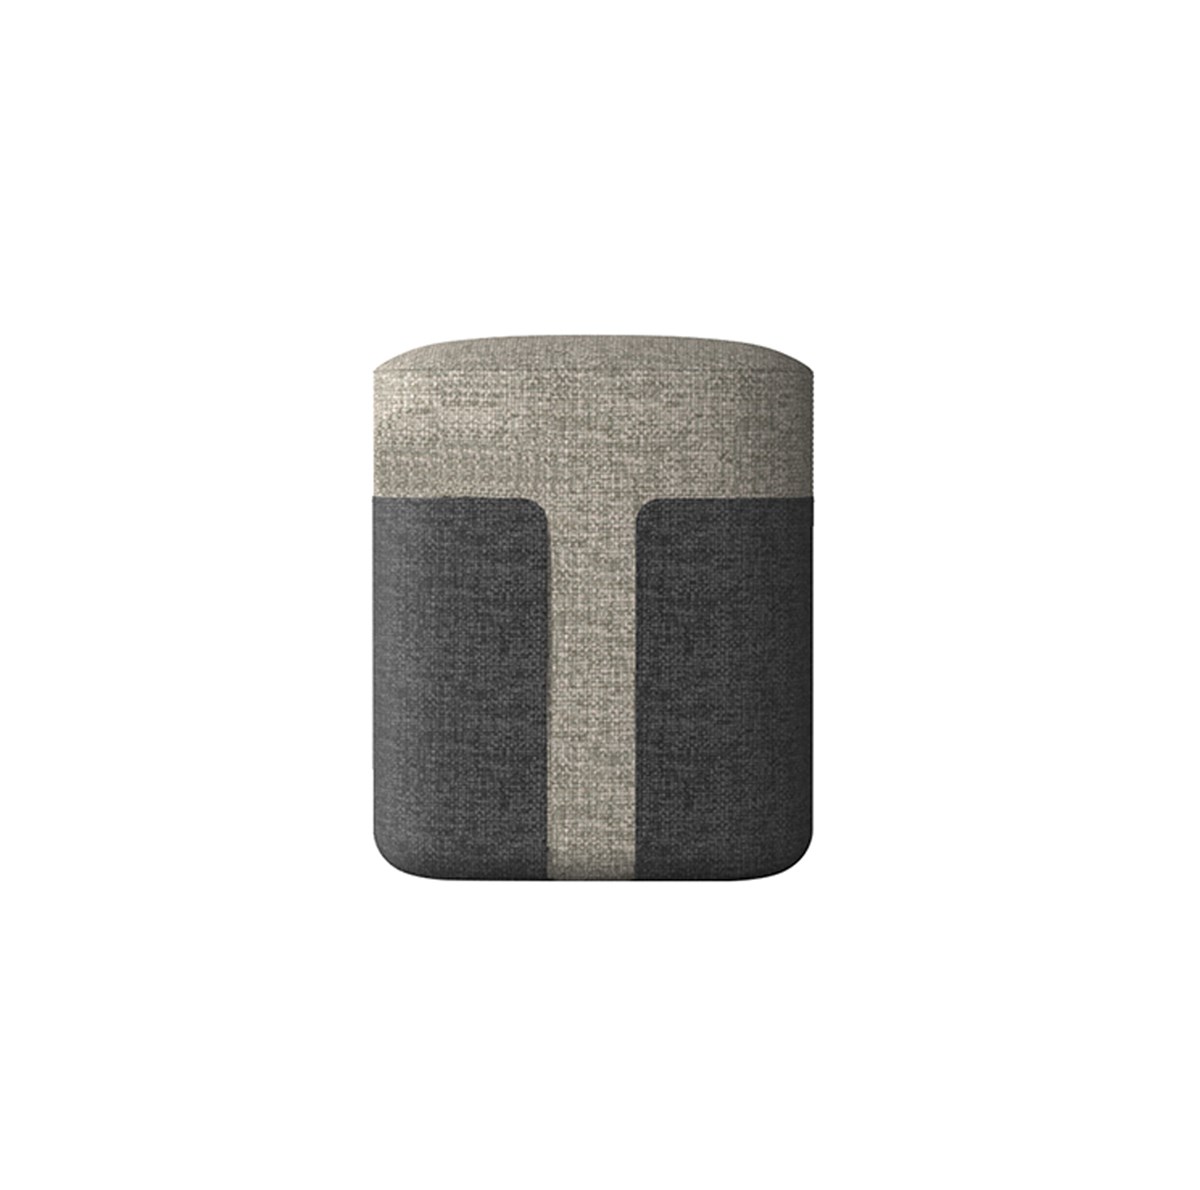 Neospace-Handy-Pouf-Contract-Matisse-1